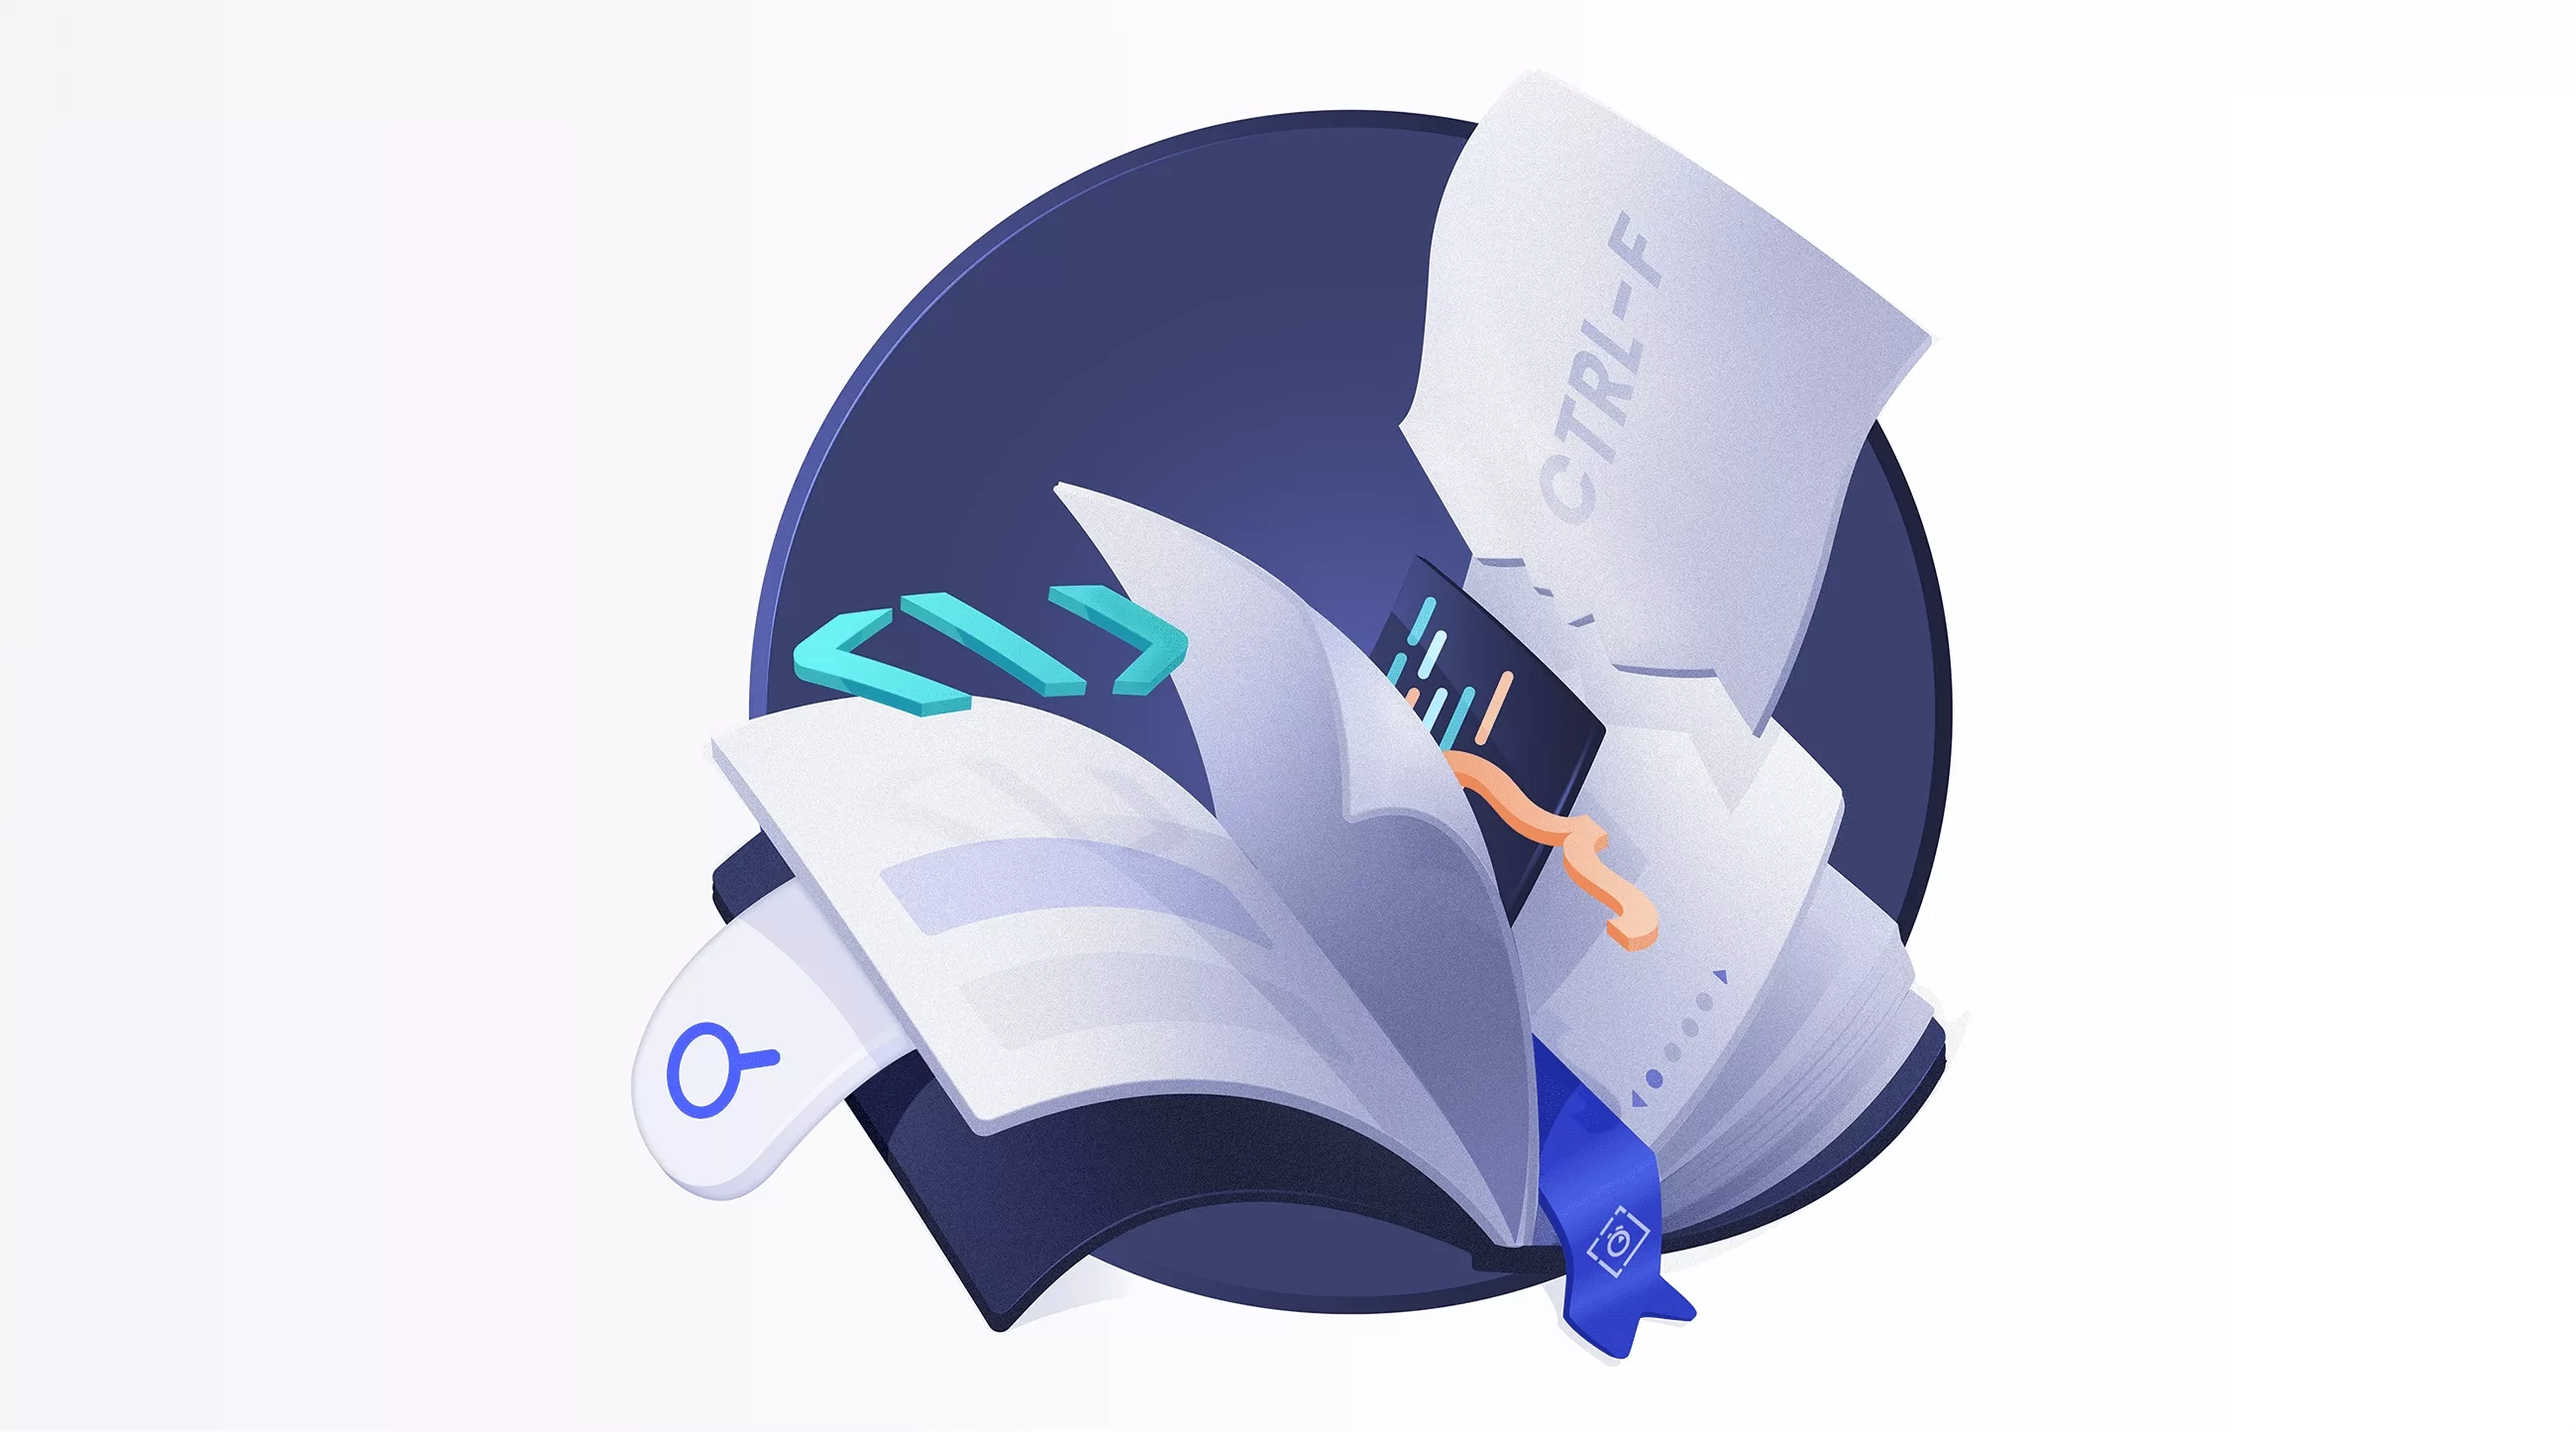 Algolia works by searching through index's of schema less data that can be queried via a search interface.